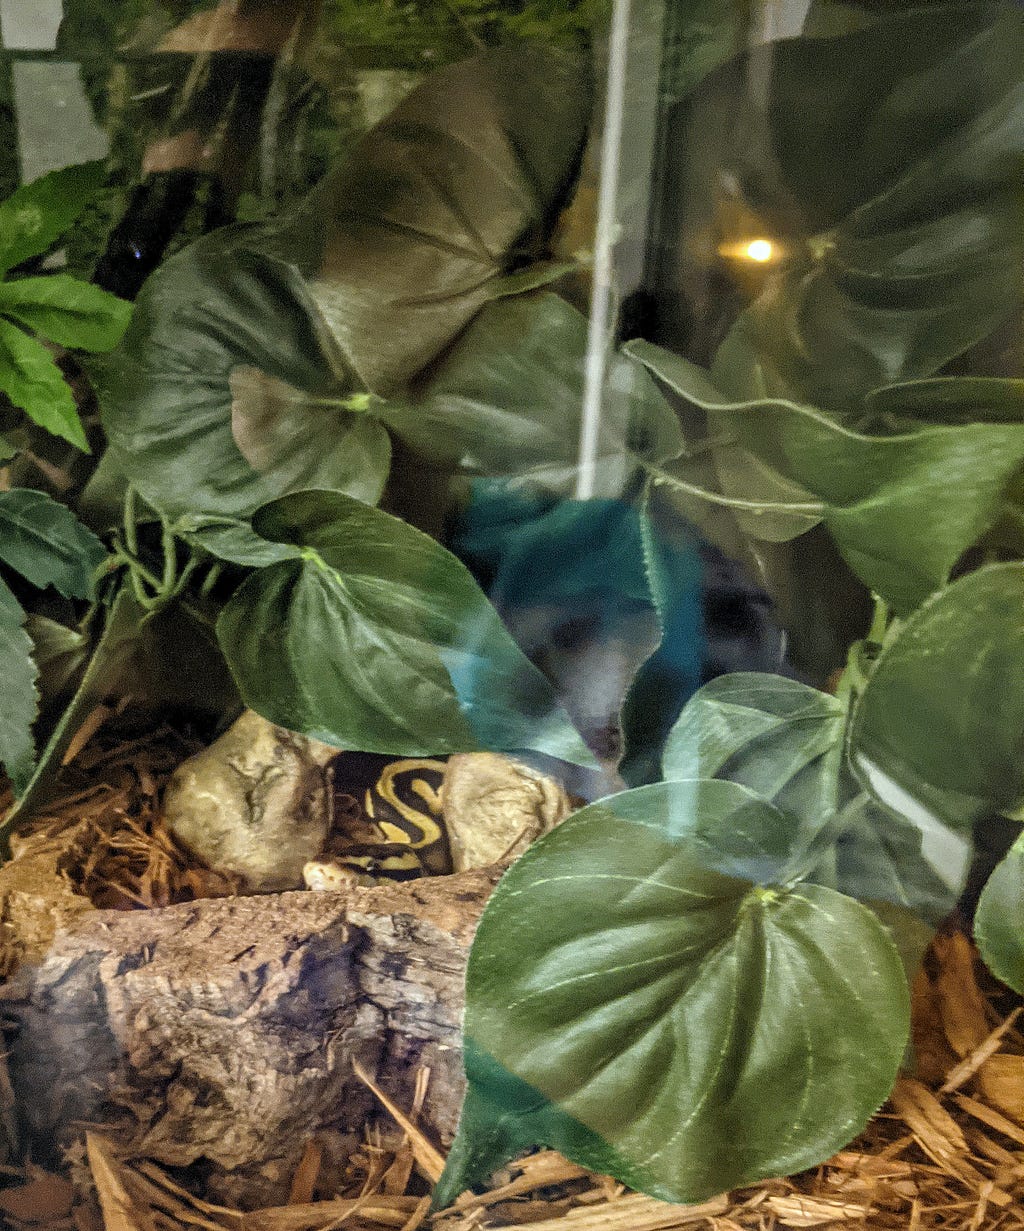 A slightly blurry photo that mostly shows big green artifical leaves. They are draped over an imitation stone hide, which rests on top of shredded wood chips behind a raised piece of cork bark. Only the first few inches of a yellow and black snake are visible, emerging from the hide and slightly obscured behind the bark, as if the snake is hiding.